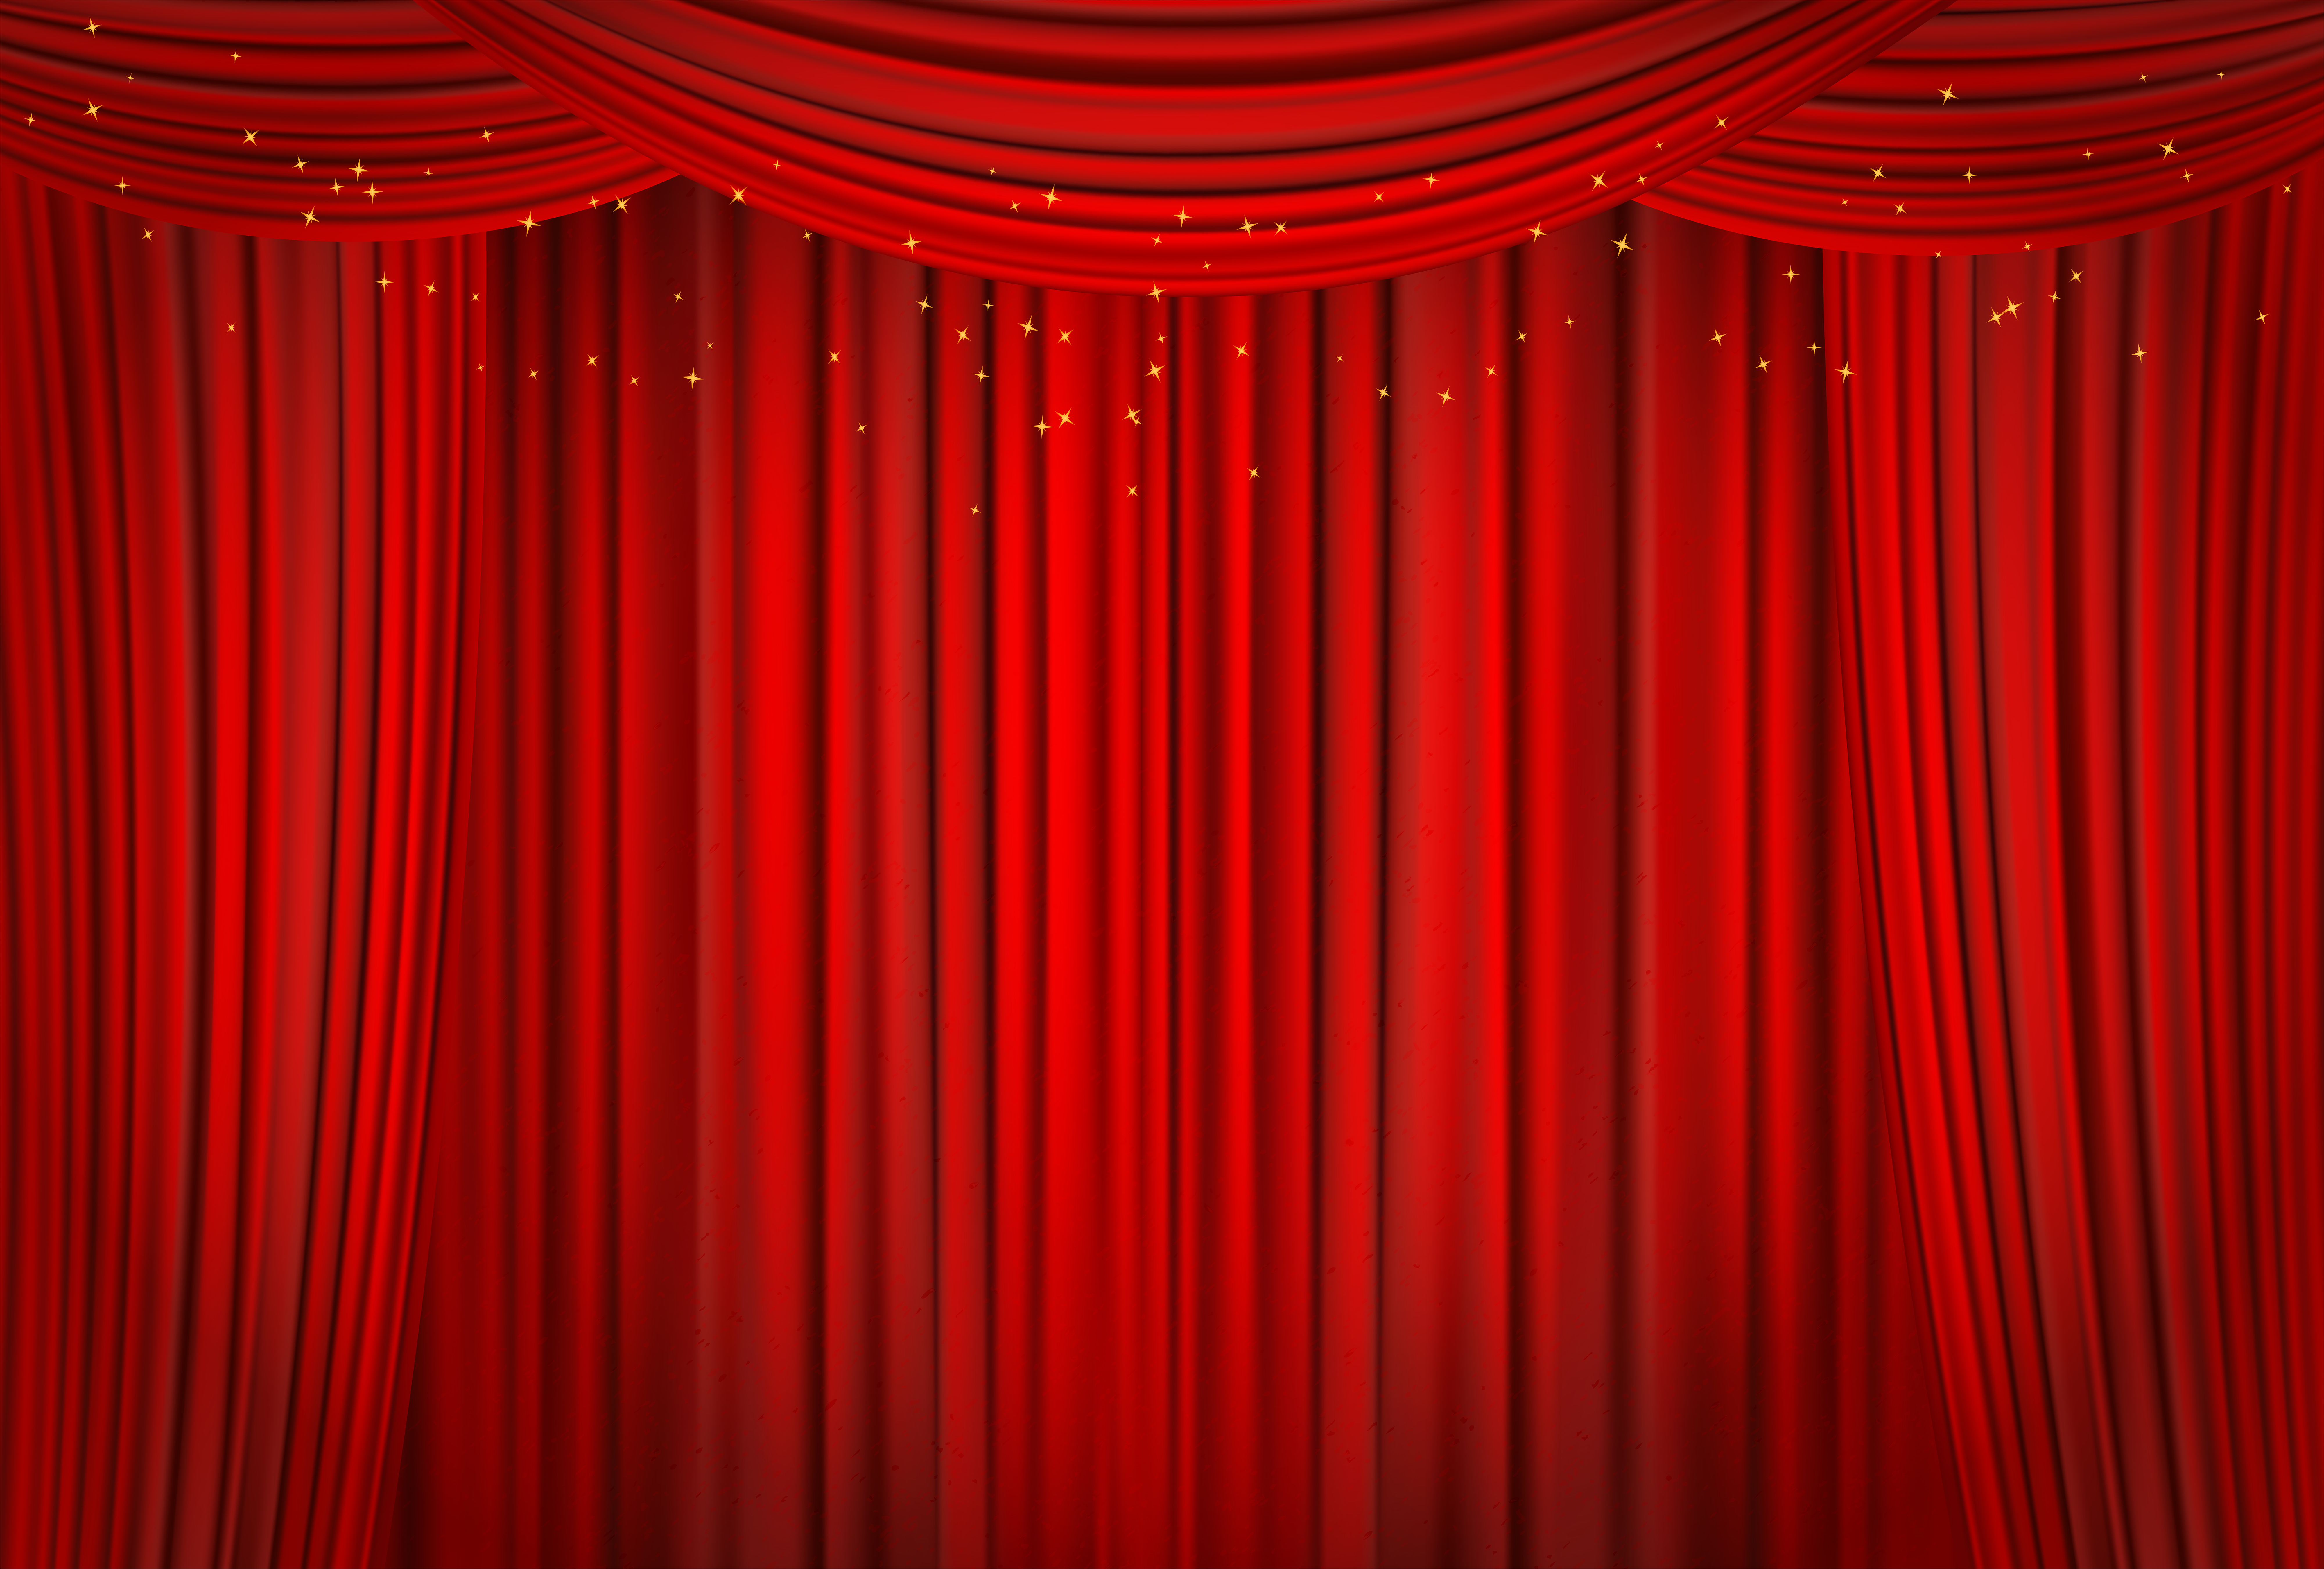 Curtains Red Background | Gallery Yopriceville - High ...